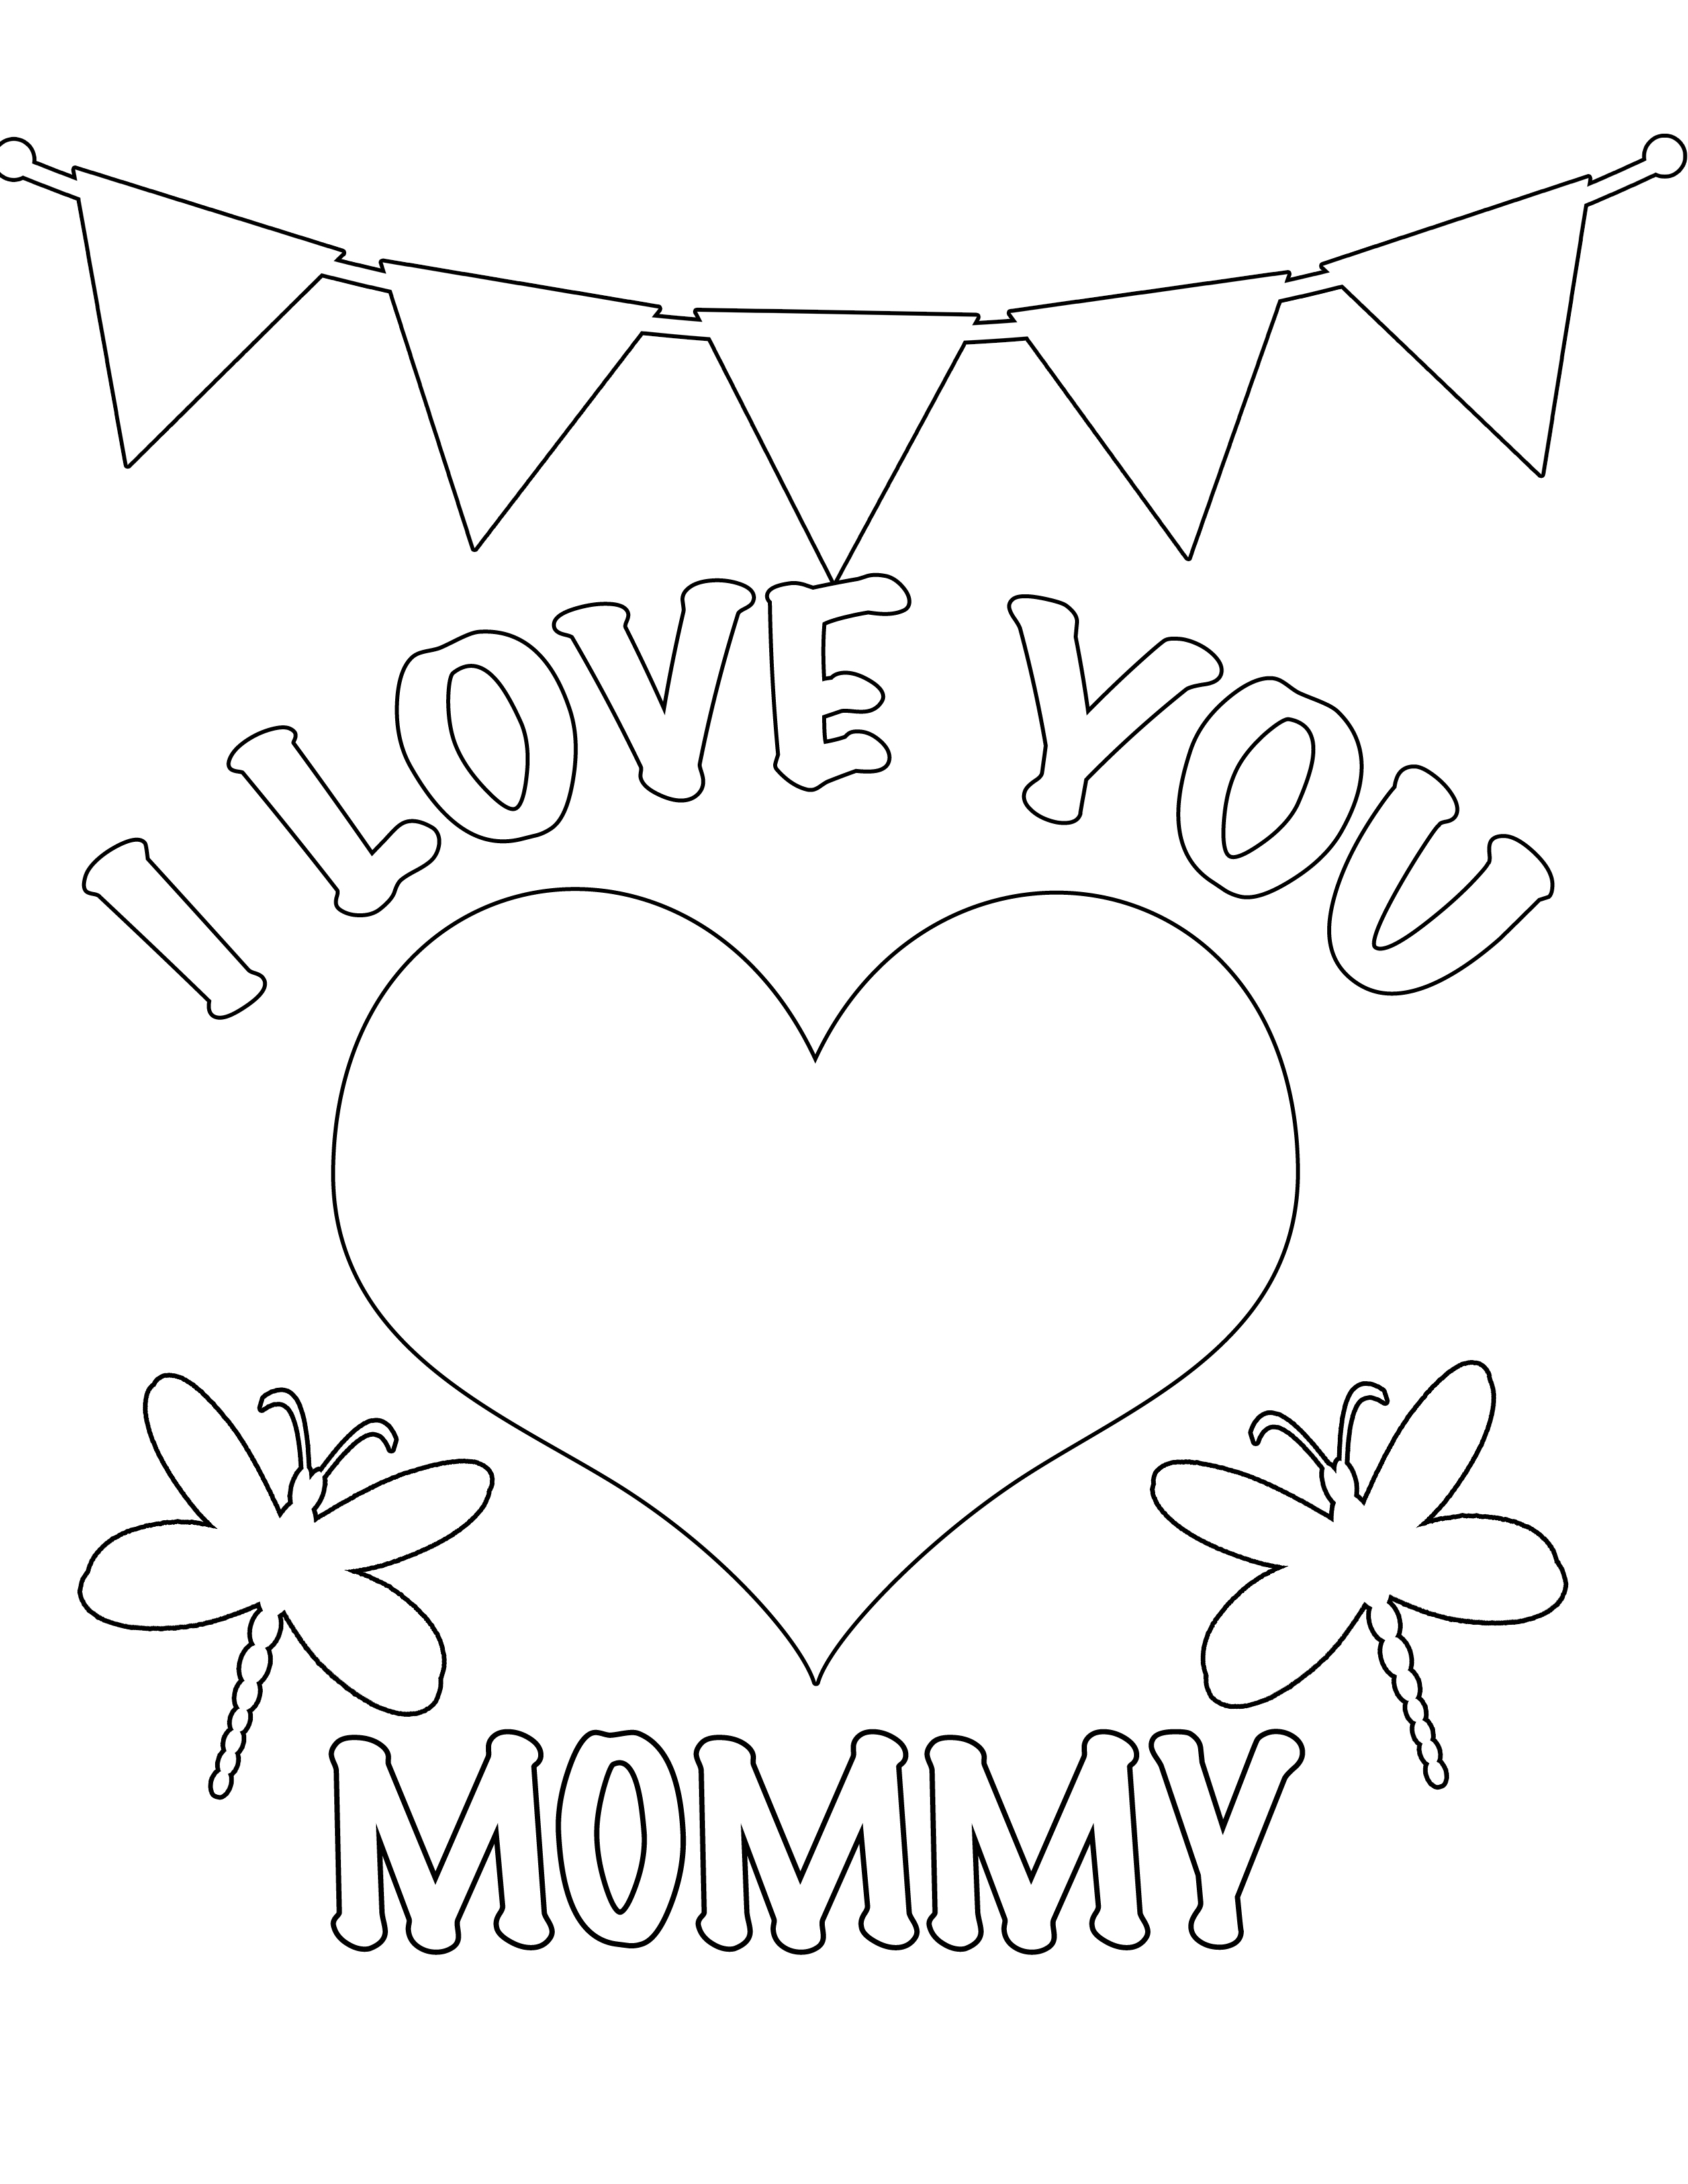 Free Printable Preschool Coloring Pages - Best Coloring ...